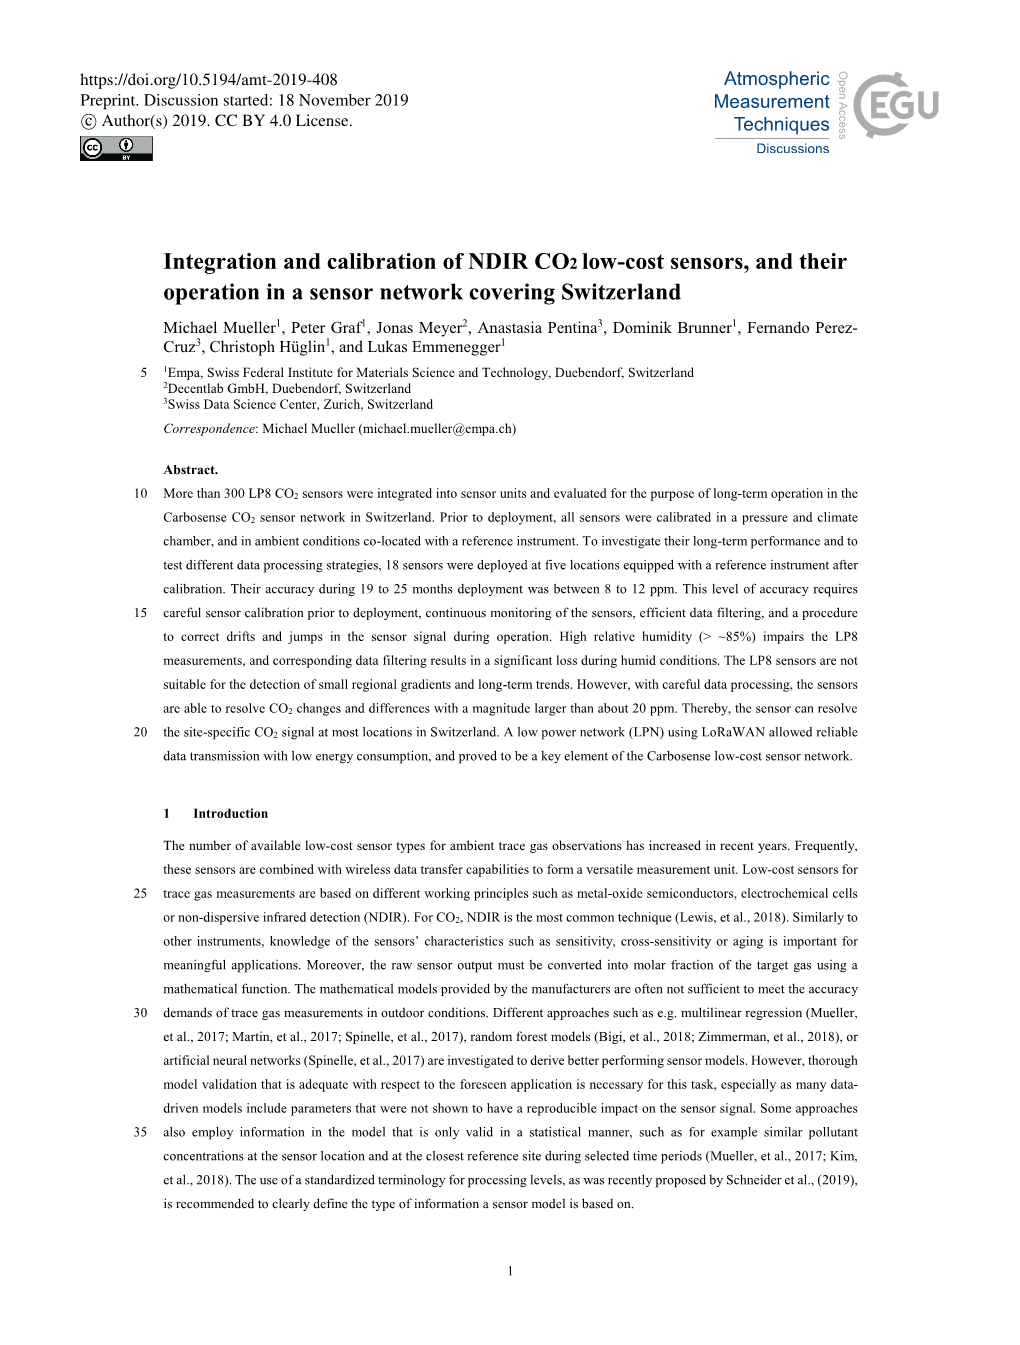 Integration and Calibration of NDIR CO2 Low-Cost Sensors, And